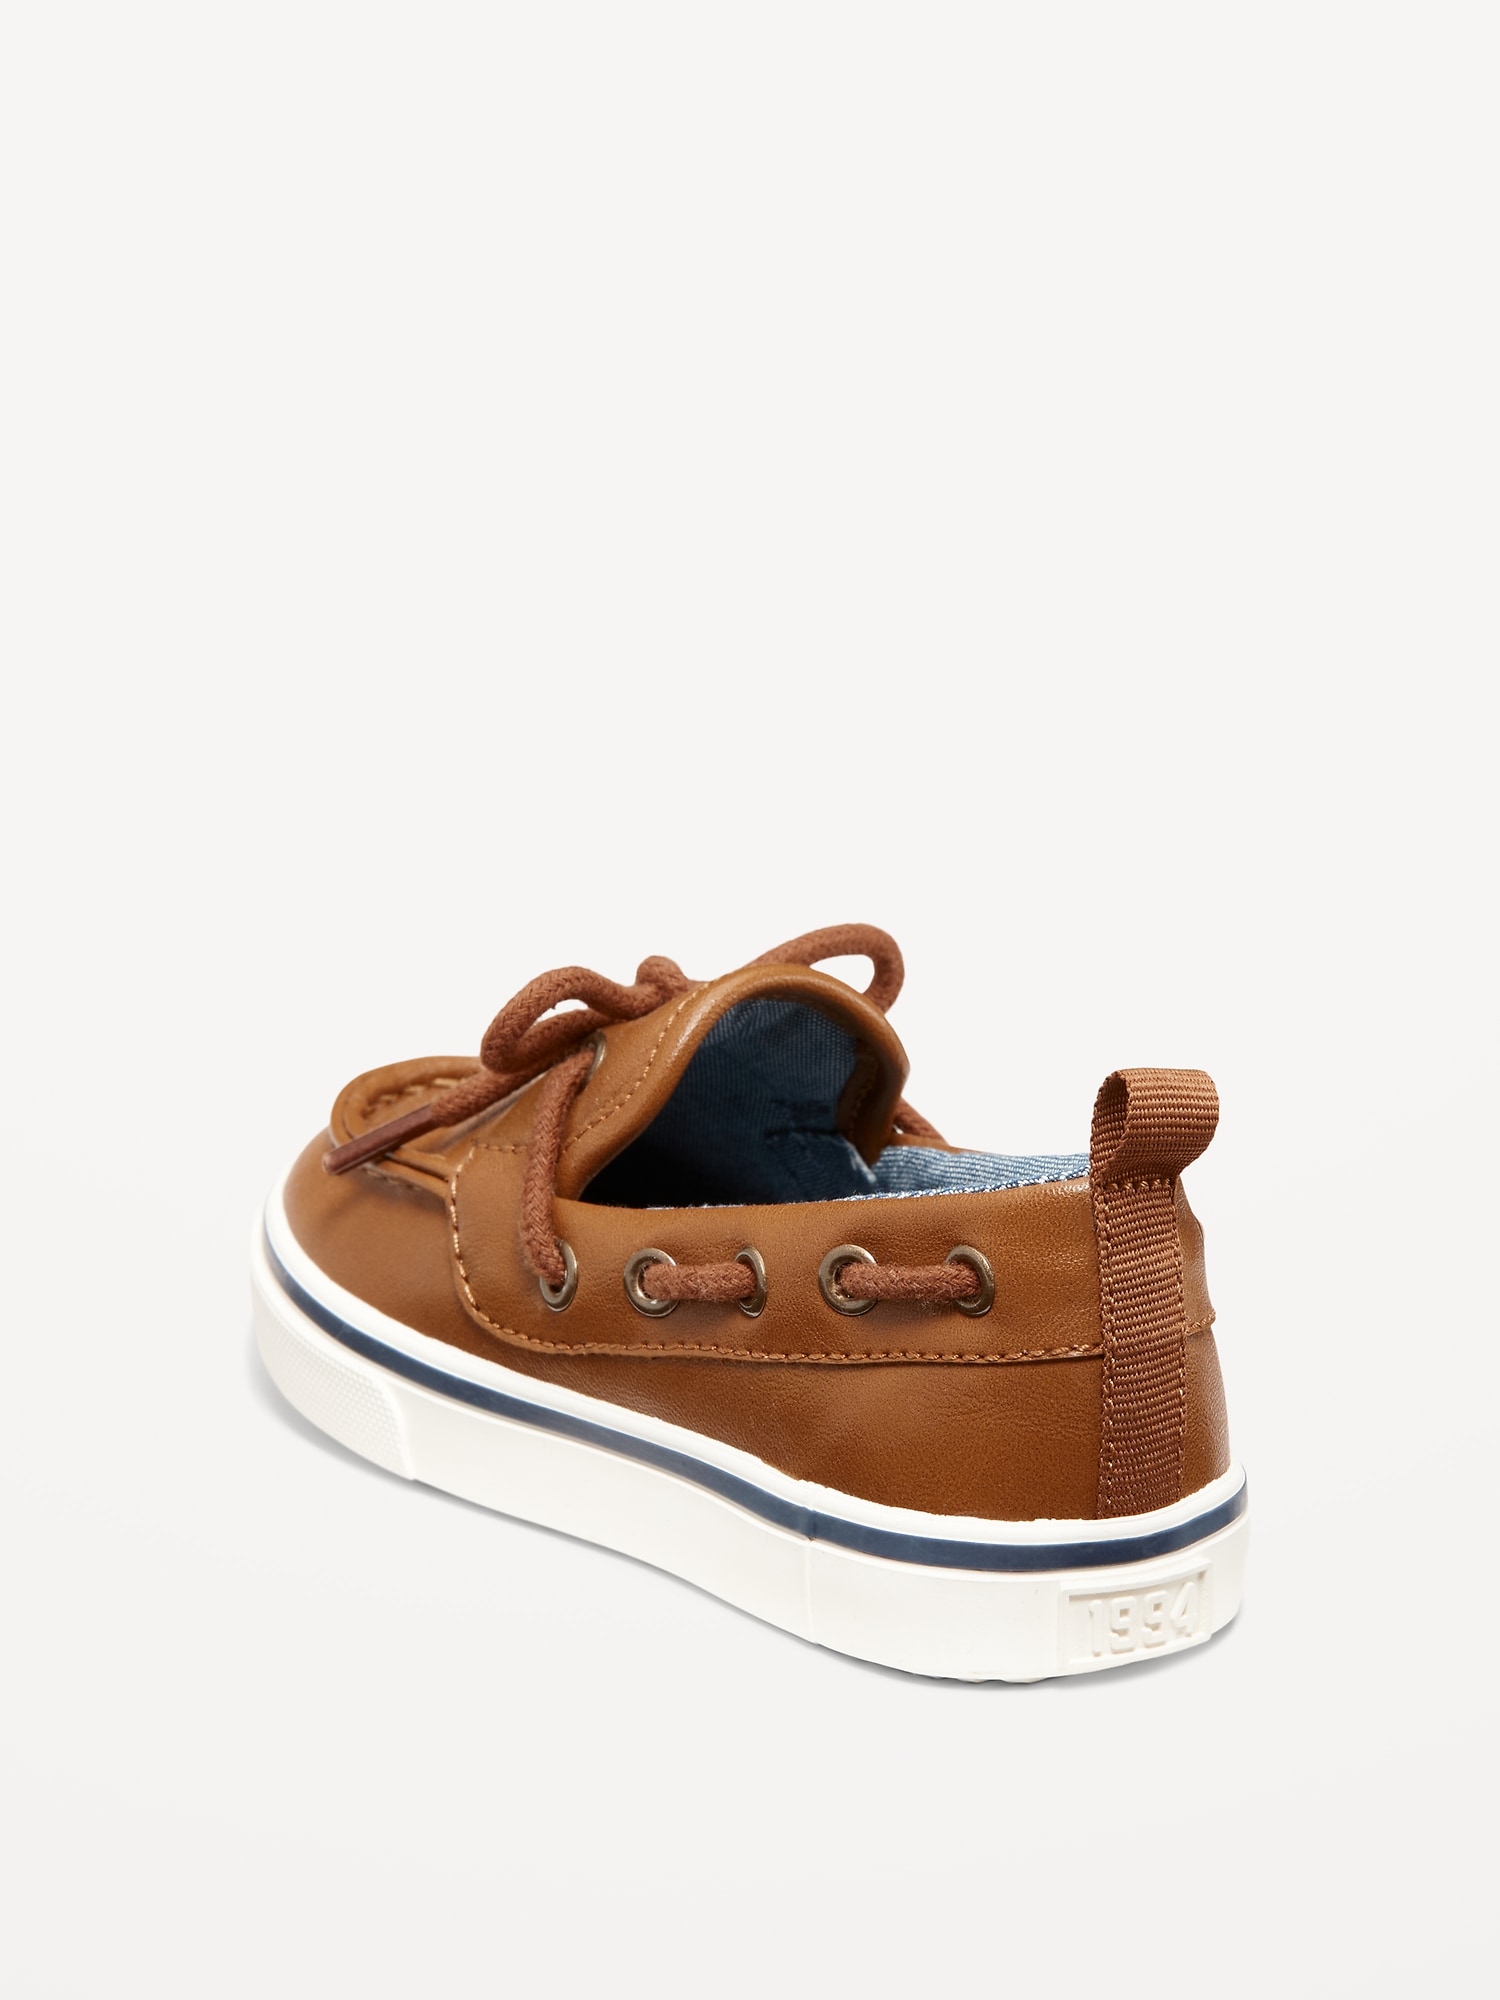 Faux-Leather Boat Shoes for Toddler Boys | Old Navy